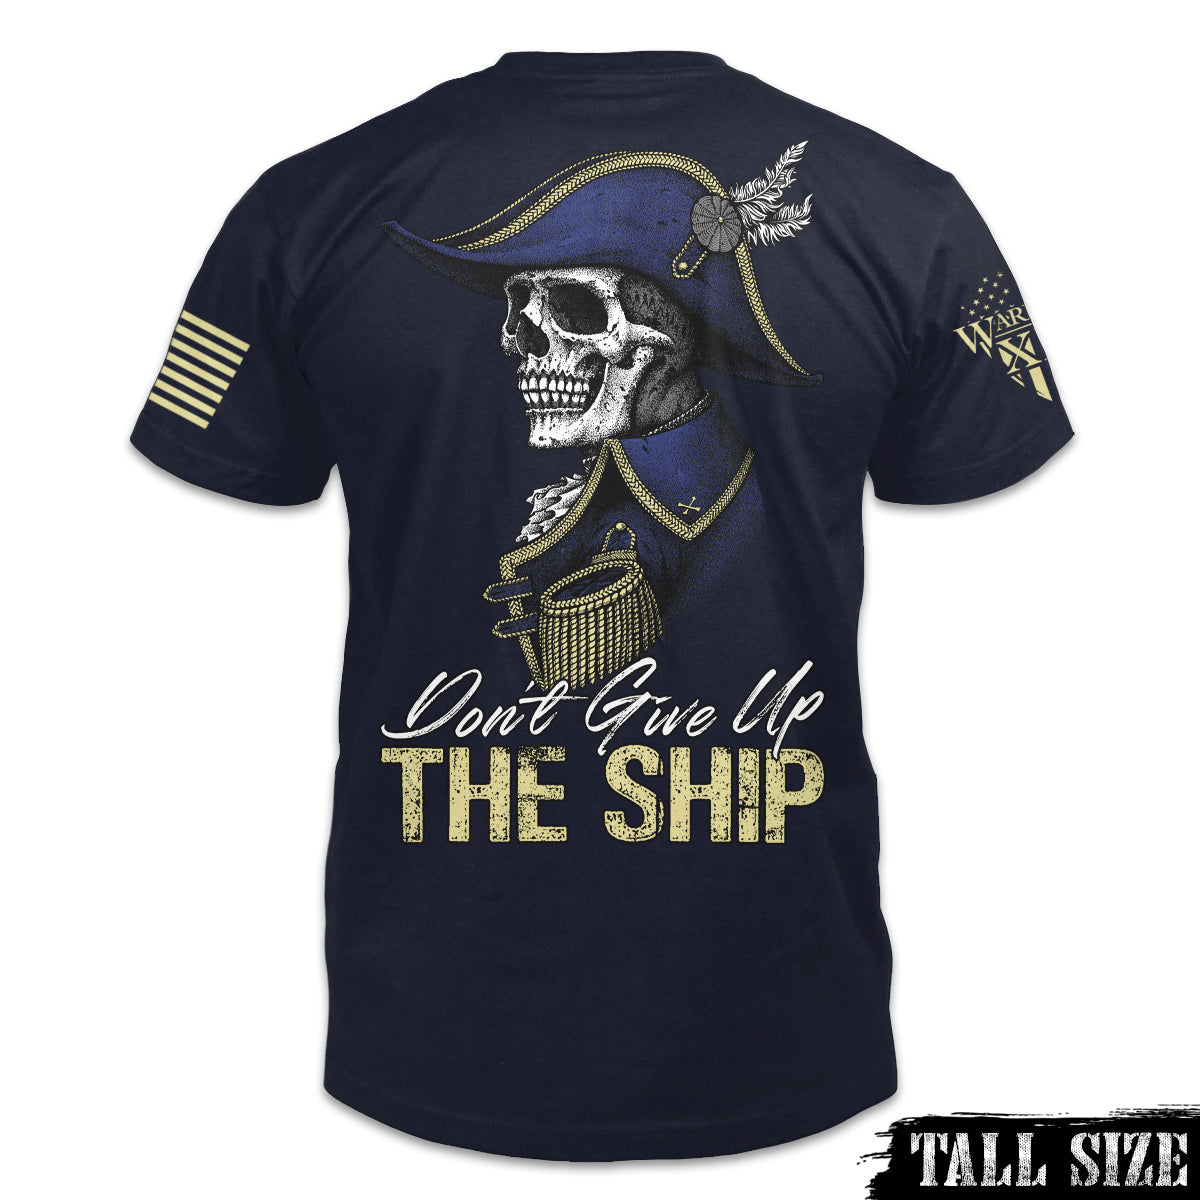 A navy blue tall size shirt with the words "Don't give up the ship" and a skeleton of Captain James Lawrence printed on the back of the shirt.